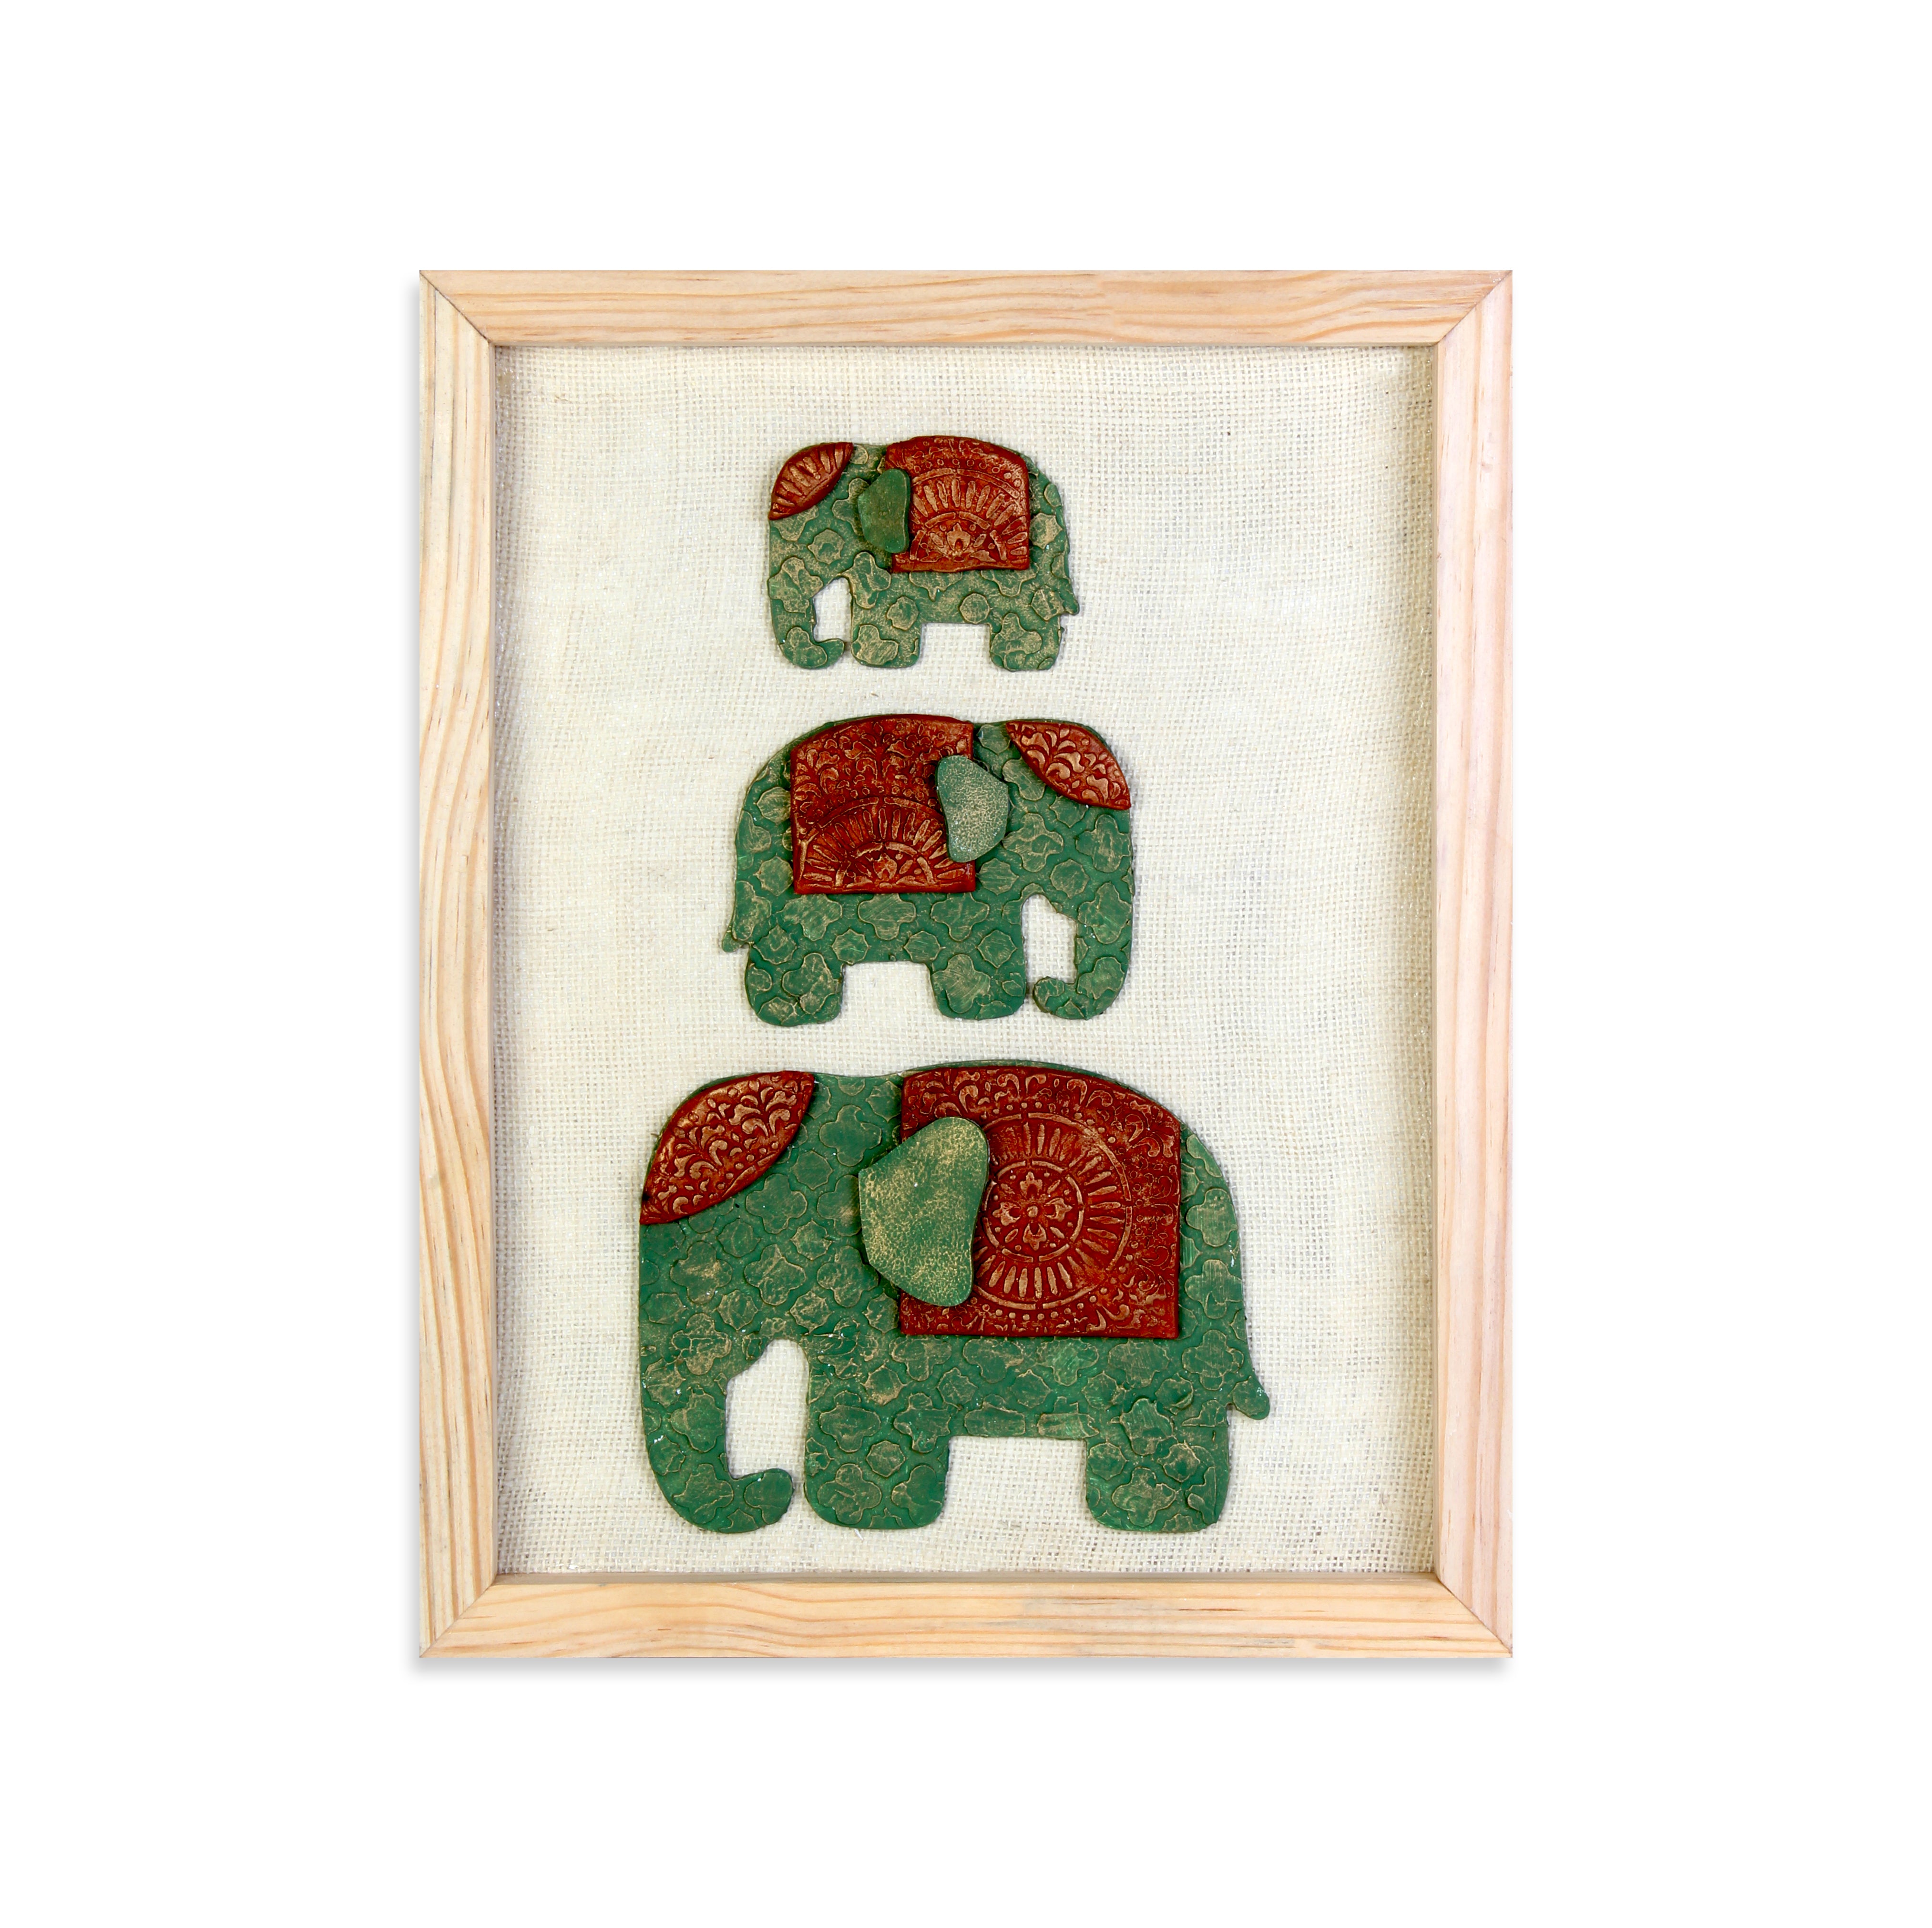 Wall Decor Handmade Majestic Elephant Green and Red with Wooden Frame Approx H14 X L11 X D0.66inch